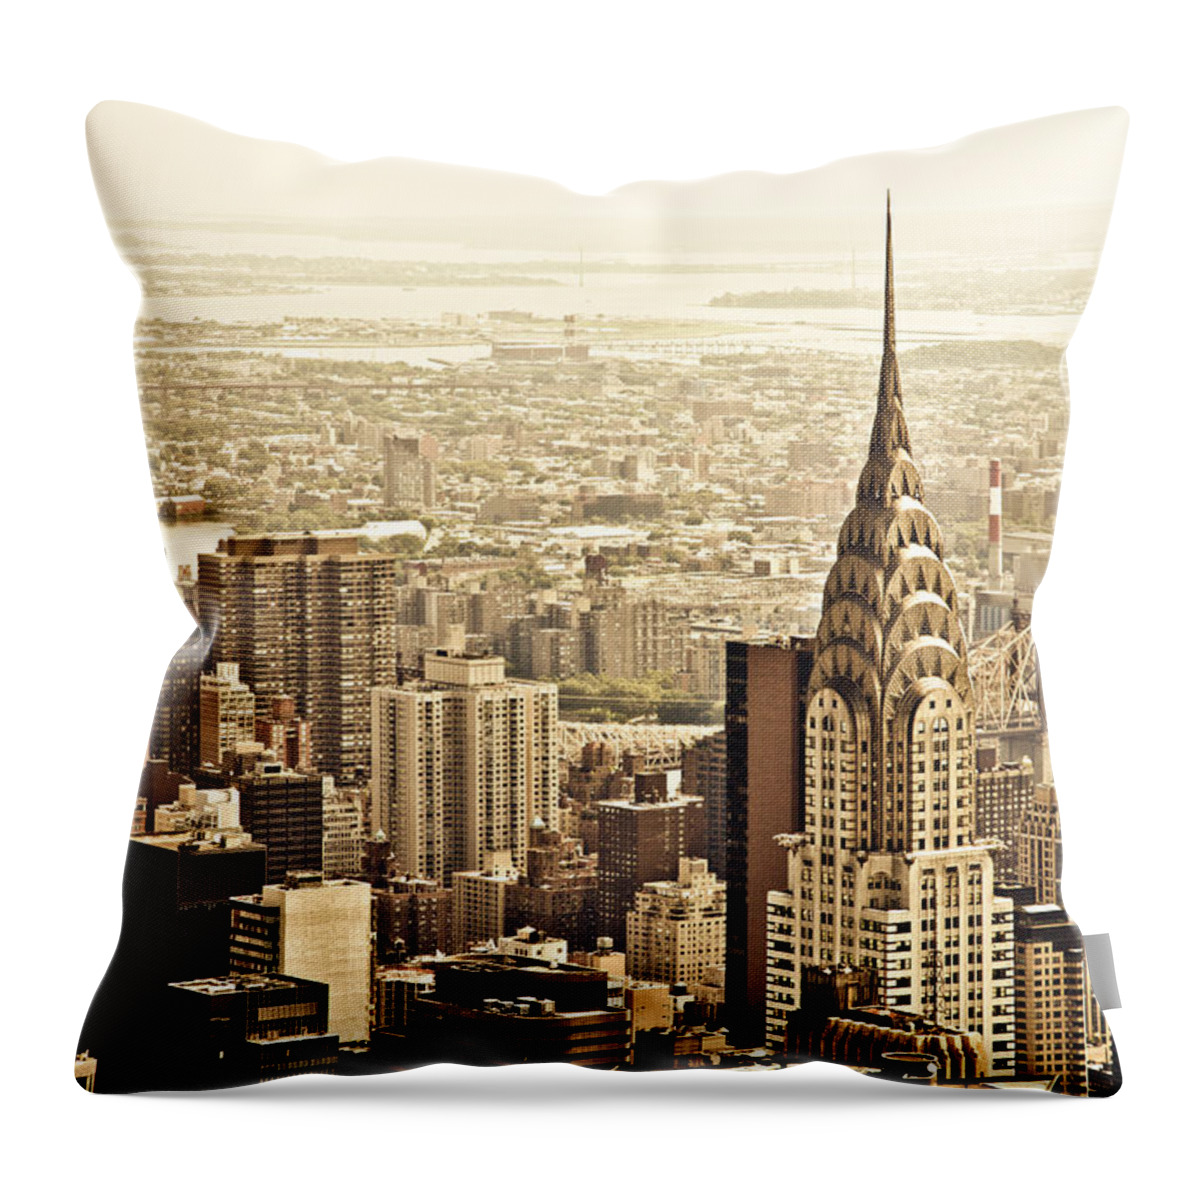 New York City Throw Pillow featuring the photograph New York City #1 by Vivienne Gucwa